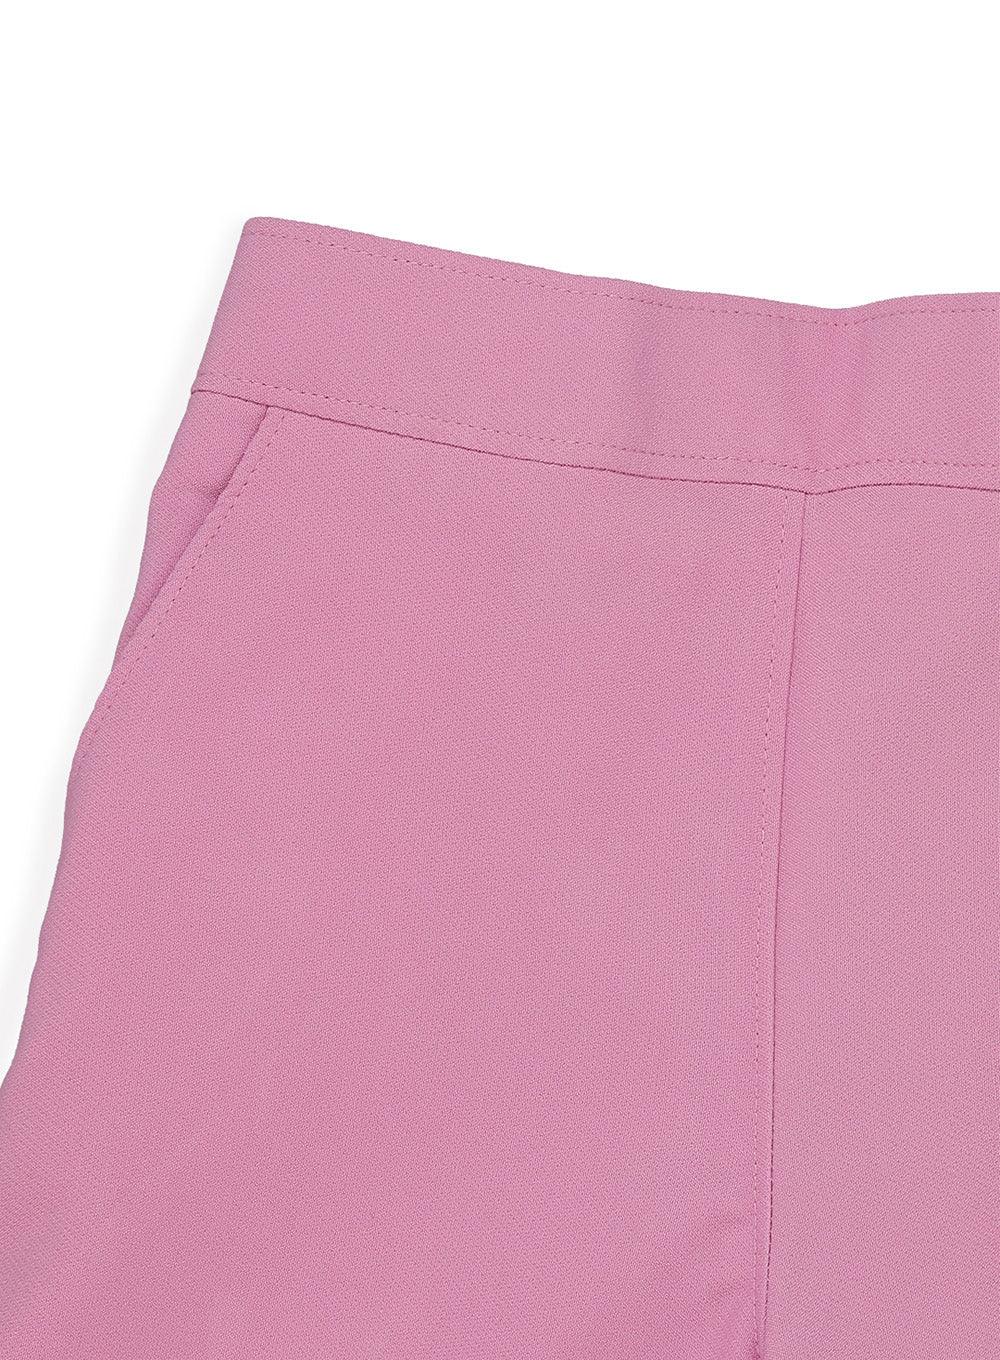 Tiny Baby Rose Pink Culottes 1974-Peach - TINY BABY INDIA shop.tinybaby.in